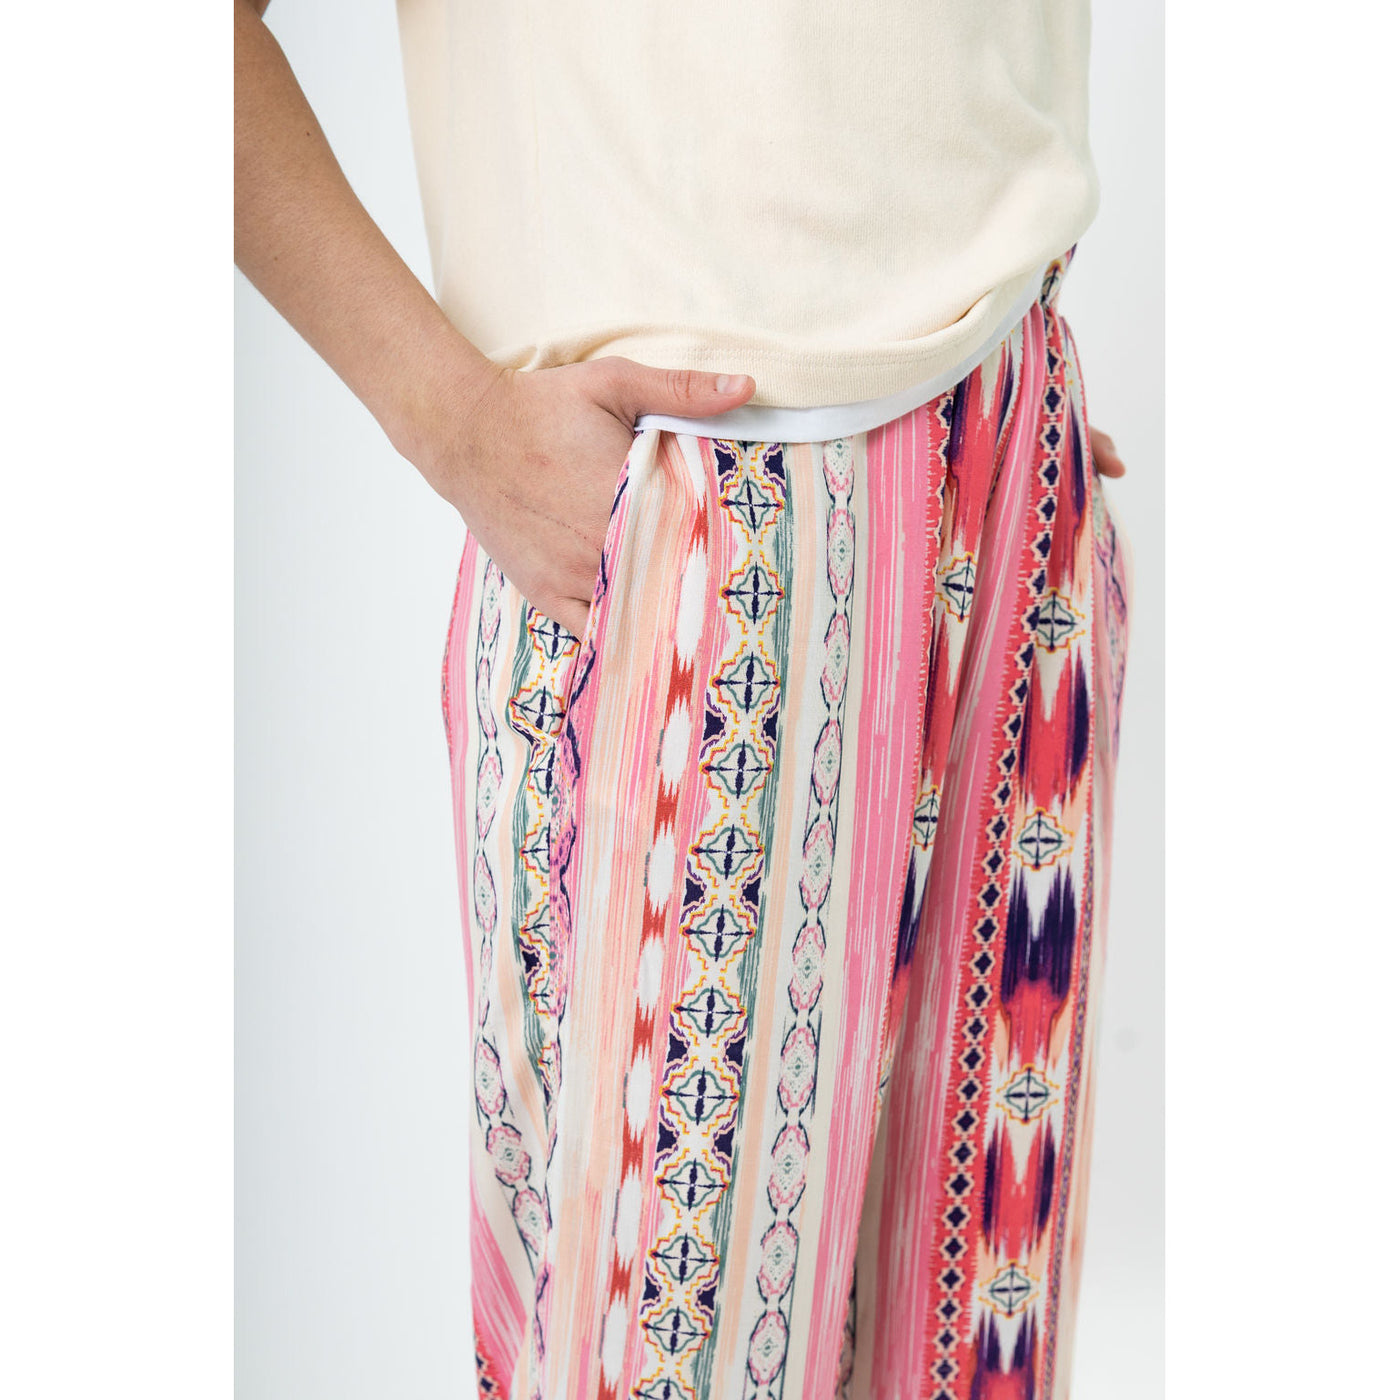 Artistic Ikat Print Rayon Lounge Pants - Effortlessly Stylish and Comfortable for Poolside or Everyday Wear